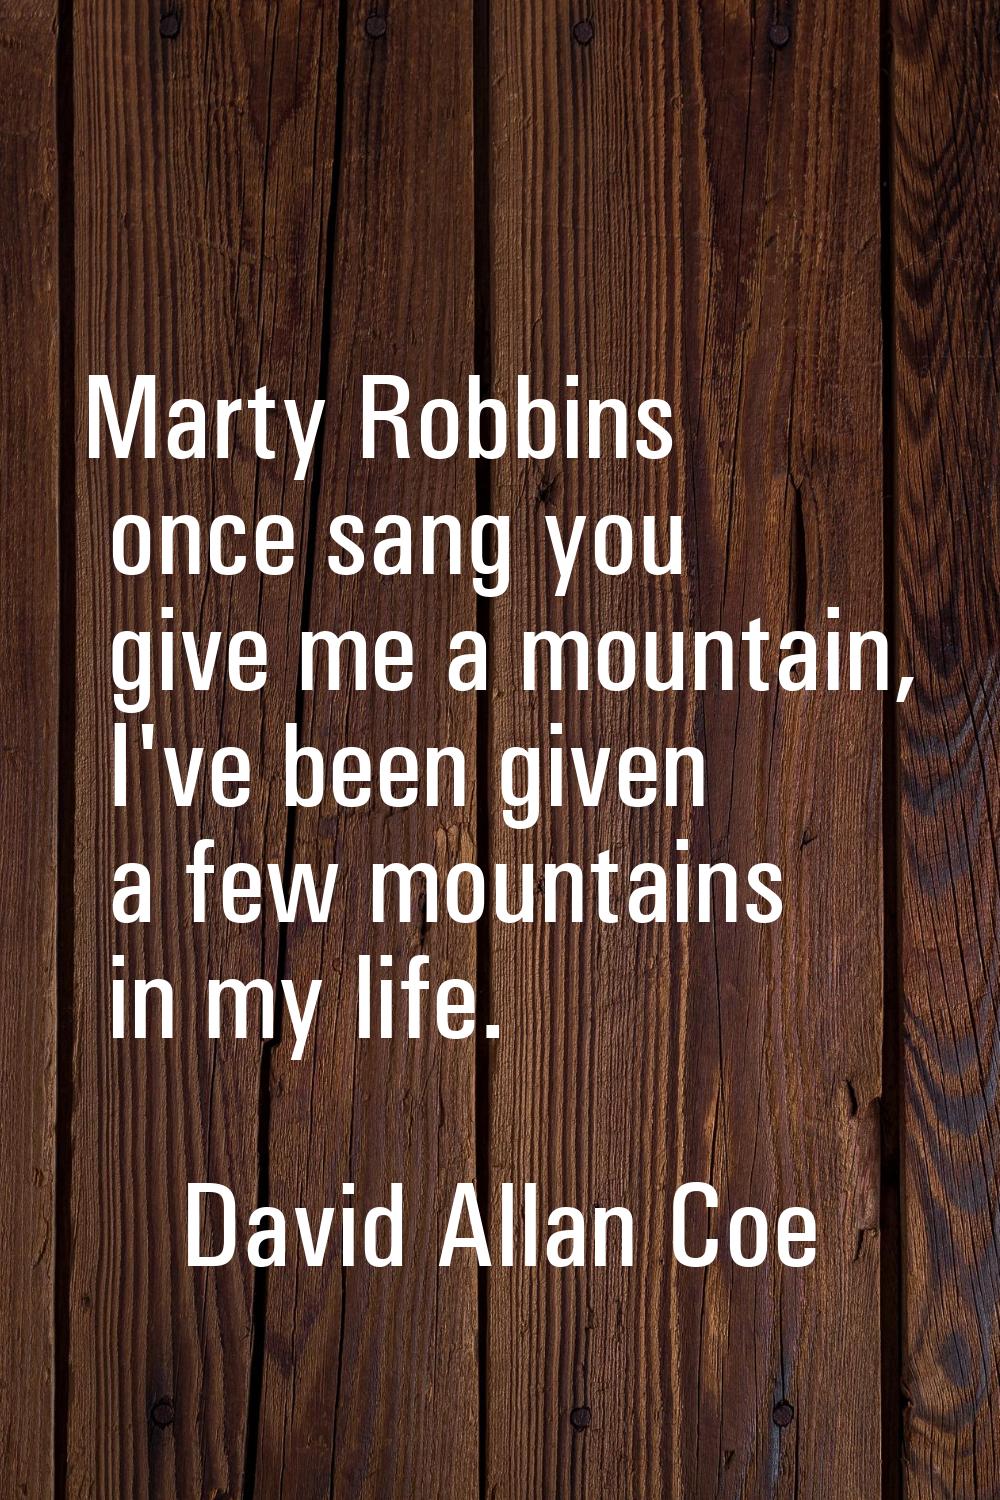 Marty Robbins once sang you give me a mountain, I've been given a few mountains in my life.